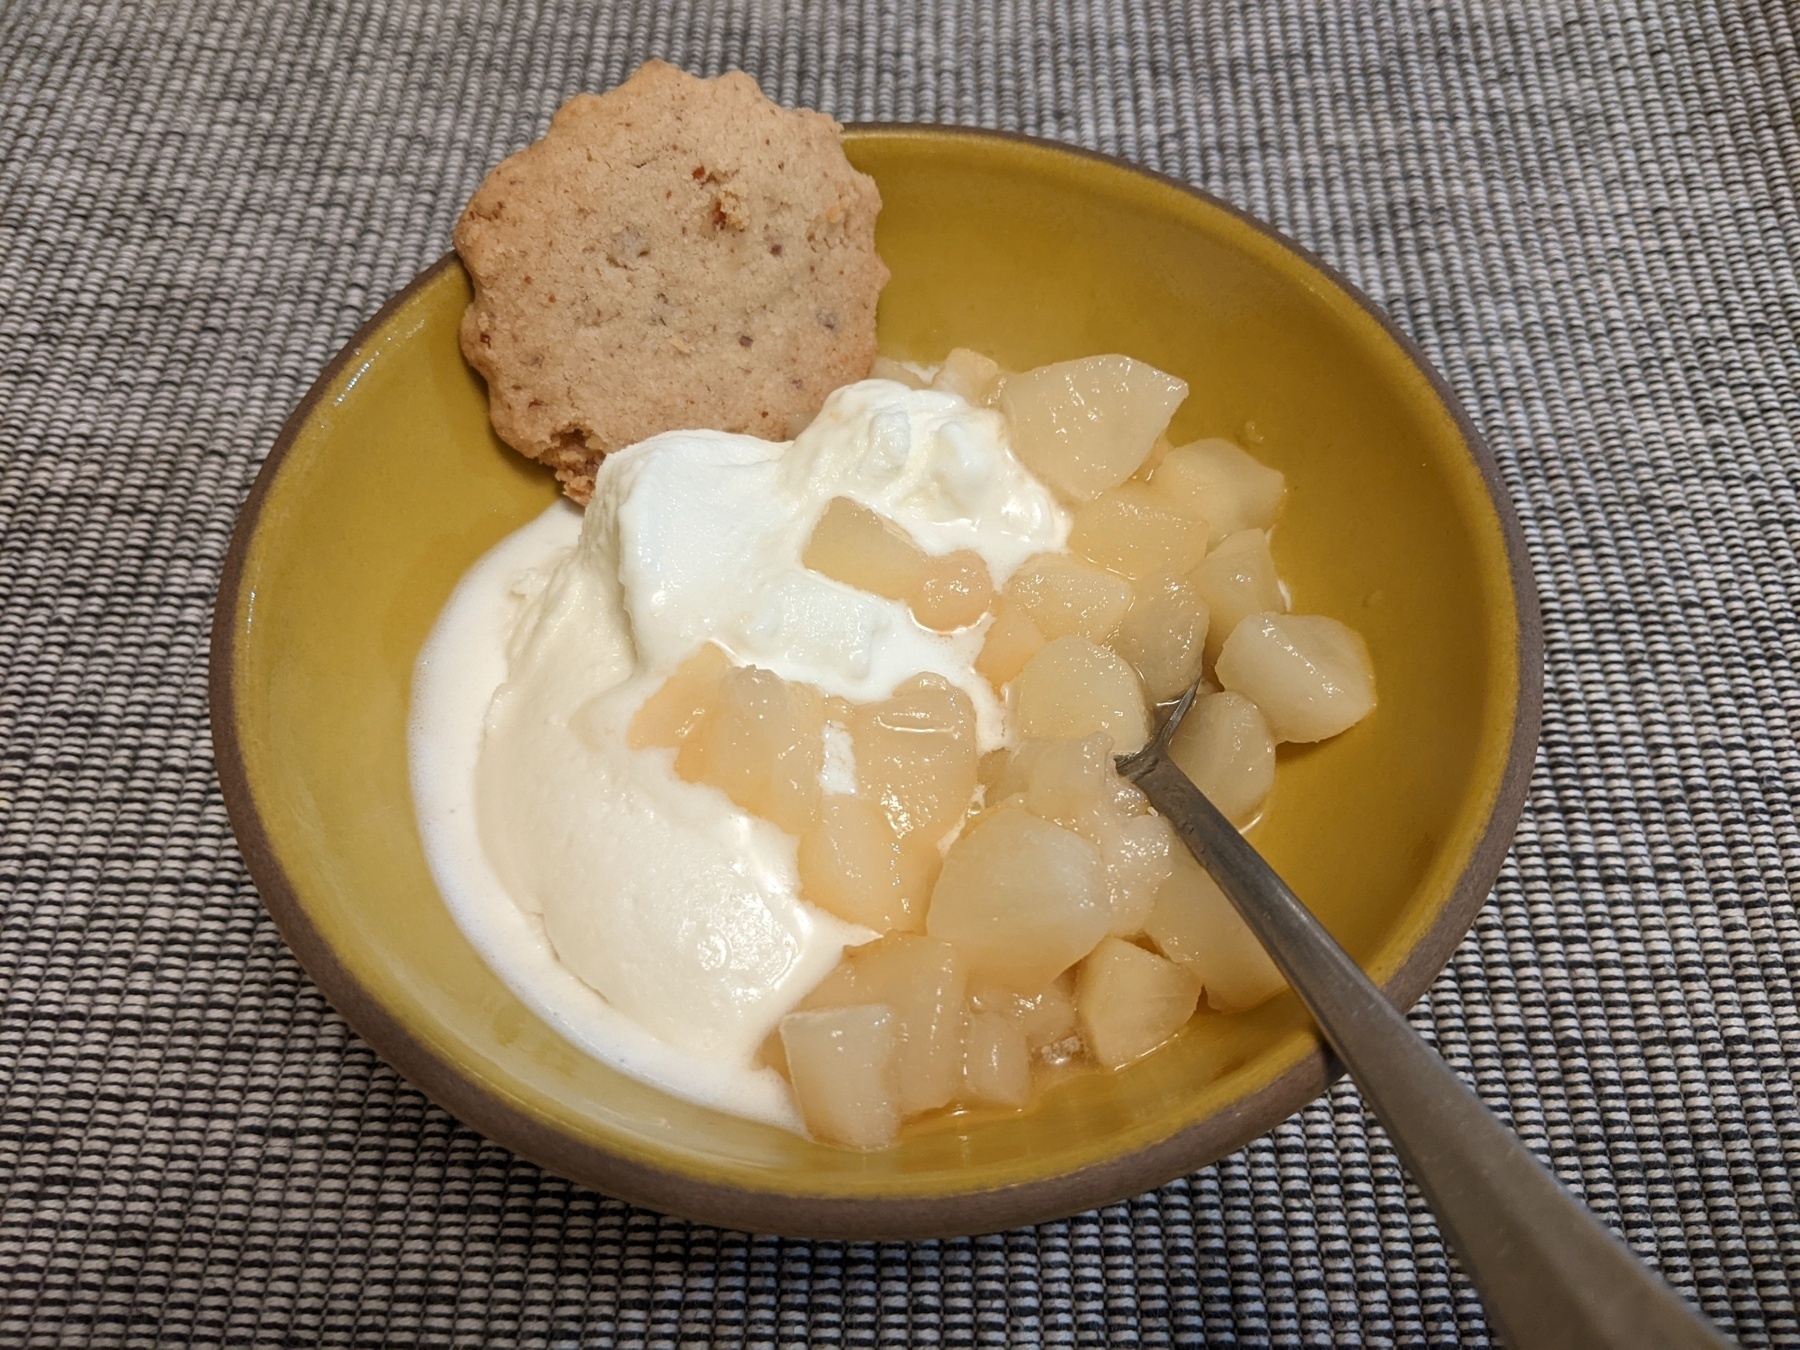 Diced cooked peaches with vanilla ice cream and a pecan cookie